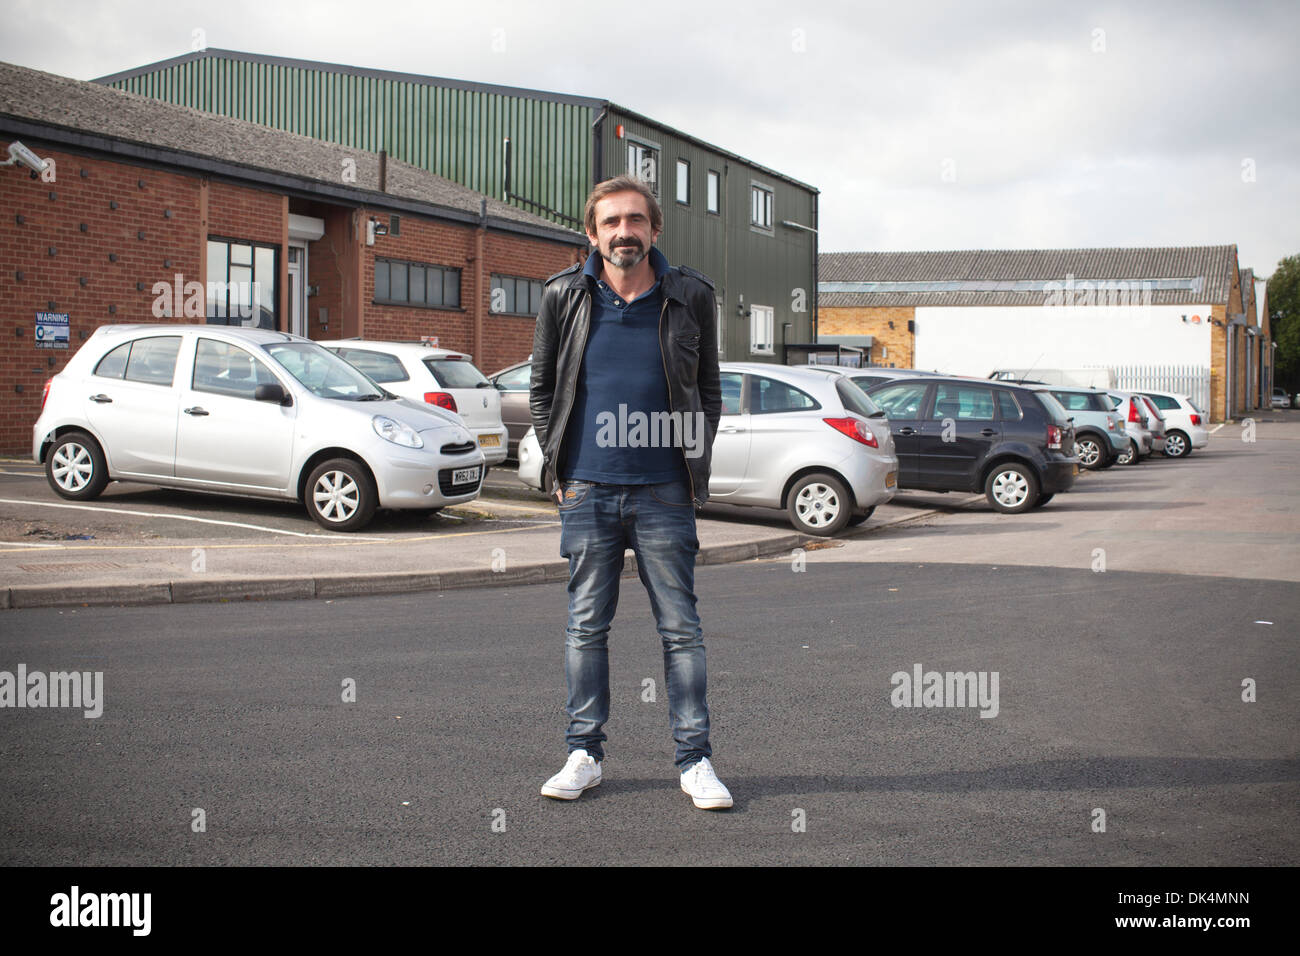 Superdry clothing part of the SuperGroup enterprise co-founded by Julian  Dunkerton CEO of SuperGroup, based in Cheltenham, UK Stock Photo - Alamy